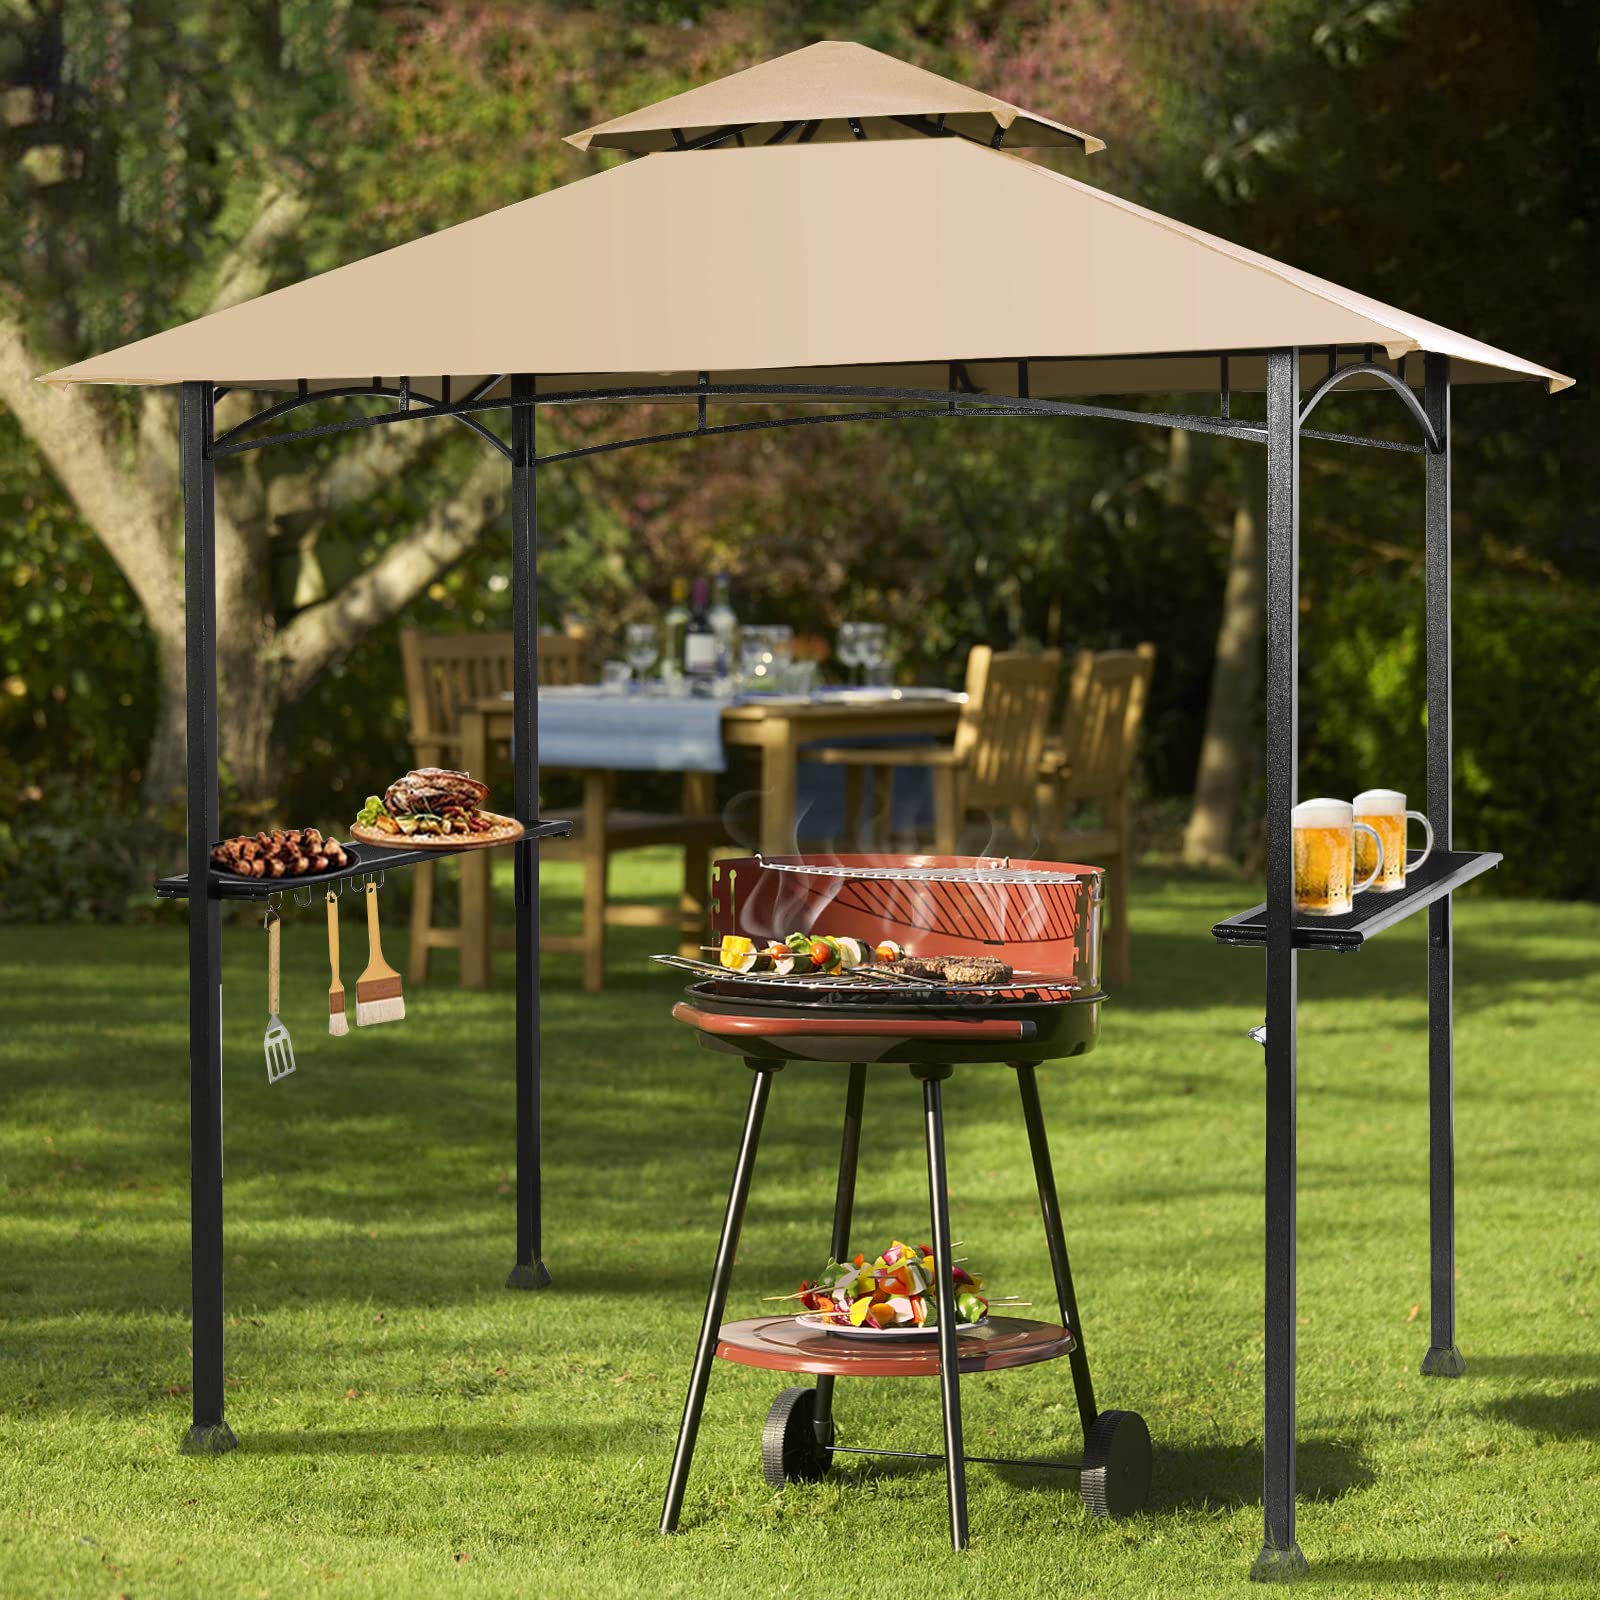 Giantex Grill Gazebo, 8ft x 5ft Grill Station with Canopy, Heavy Duty Steel Frame, 2 Side Shelves, 5 Hooks, 8 Ground Stakes, Outdoor Grill Shelter Barbecue Tent for Backyard Patio Camping (Beige)